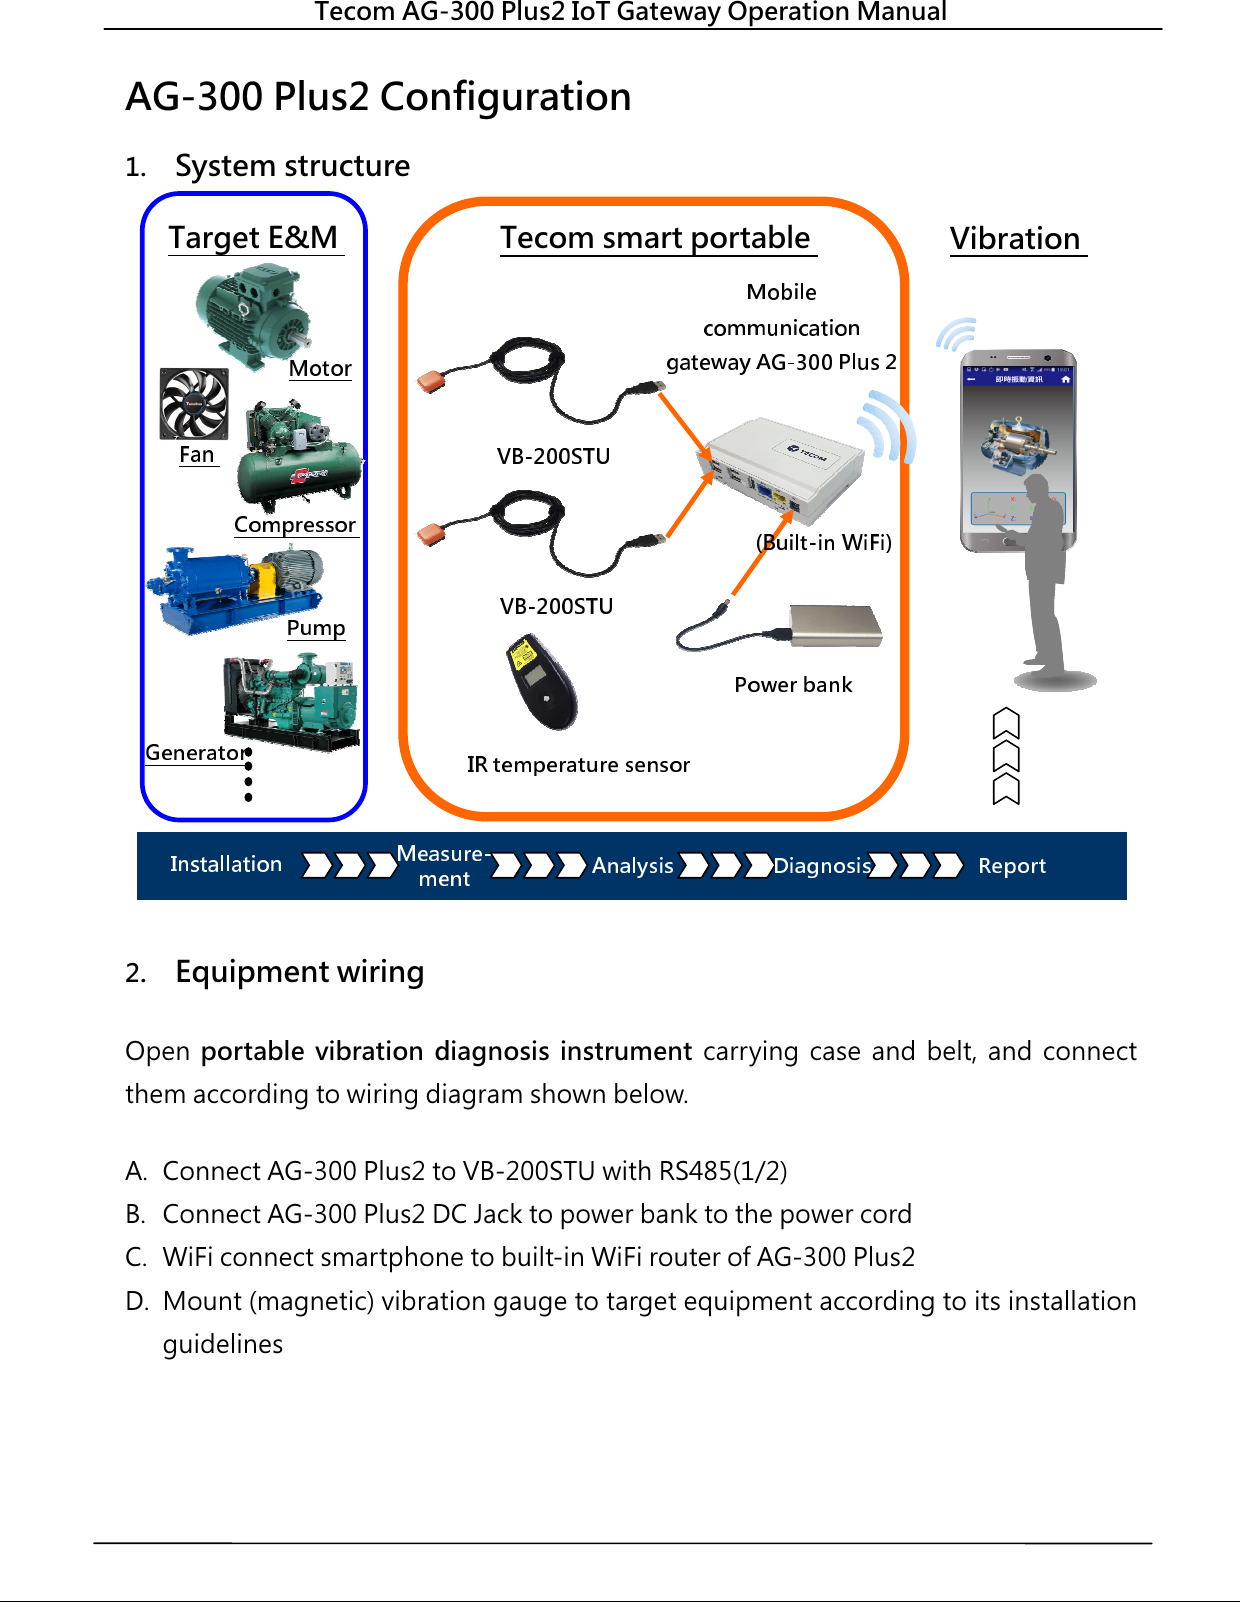  Tecom AG-300 Plus2 IoT Gateway Operation Manual   AG-300 Plus2 Configuration   1. System structure     2. Equipment wiring    Open  portable  vibration  diagnosis  instrument  carrying  case  and  belt,  and  connect them according to wiring diagram shown below.    A. Connect AG-300 Plus2 to VB-200STU with RS485(1/2)   B. Connect AG-300 Plus2 DC Jack to power bank to the power cord   C. WiFi connect smartphone to built-in WiFi router of AG-300 Plus2   D. Mount (magnetic) vibration gauge to target equipment according to its installation guidelines     Tecom smart portable Target E&amp;M  Vibration      